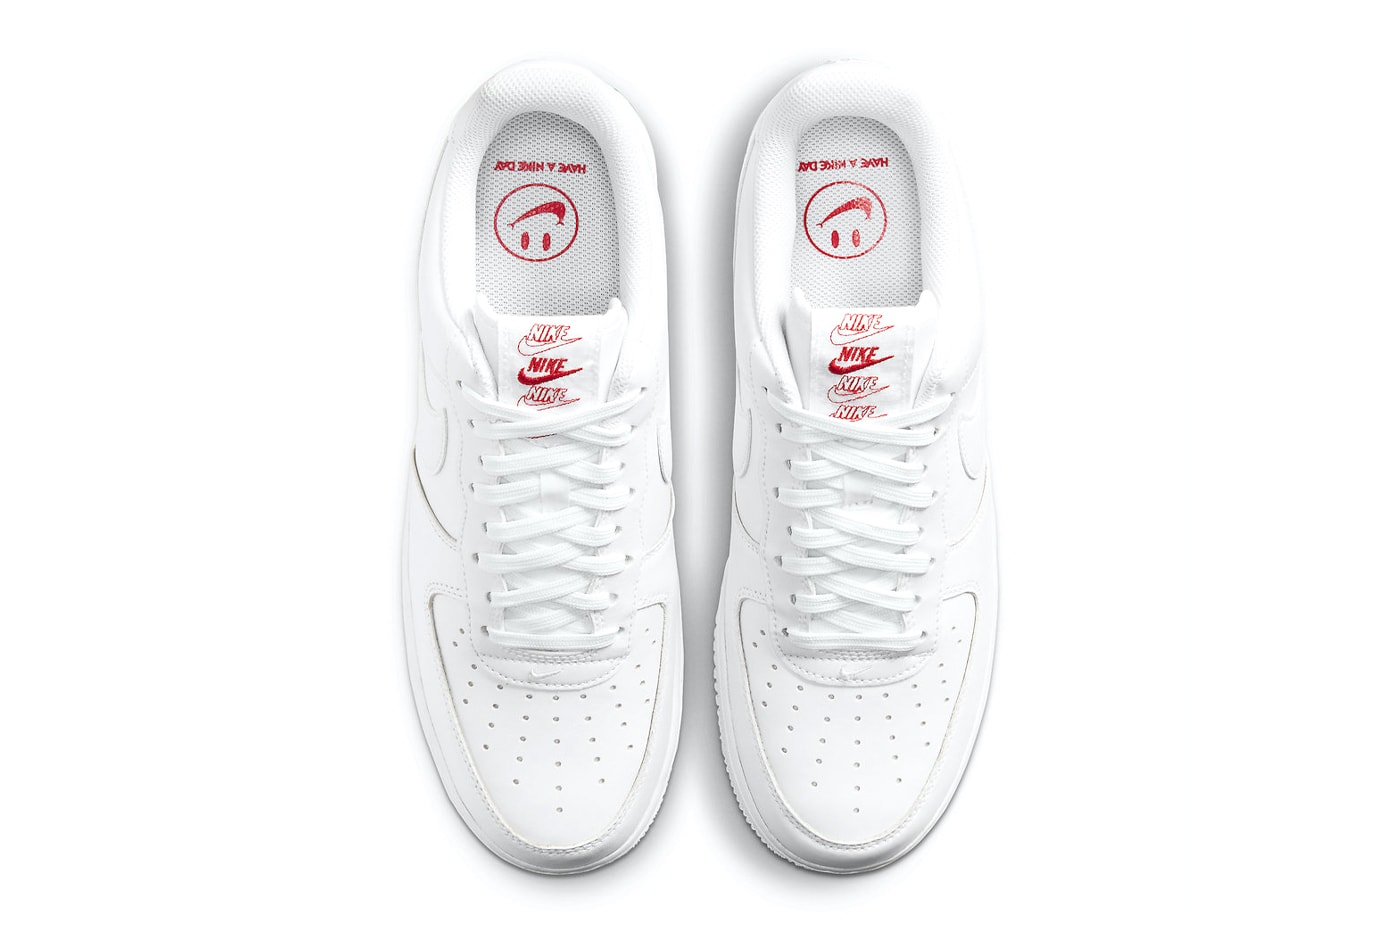 Nike Air Force 1 Low "Rose" Restocks For a Holiday 2023 Release CU6312-100 White/University Red-Pine Green